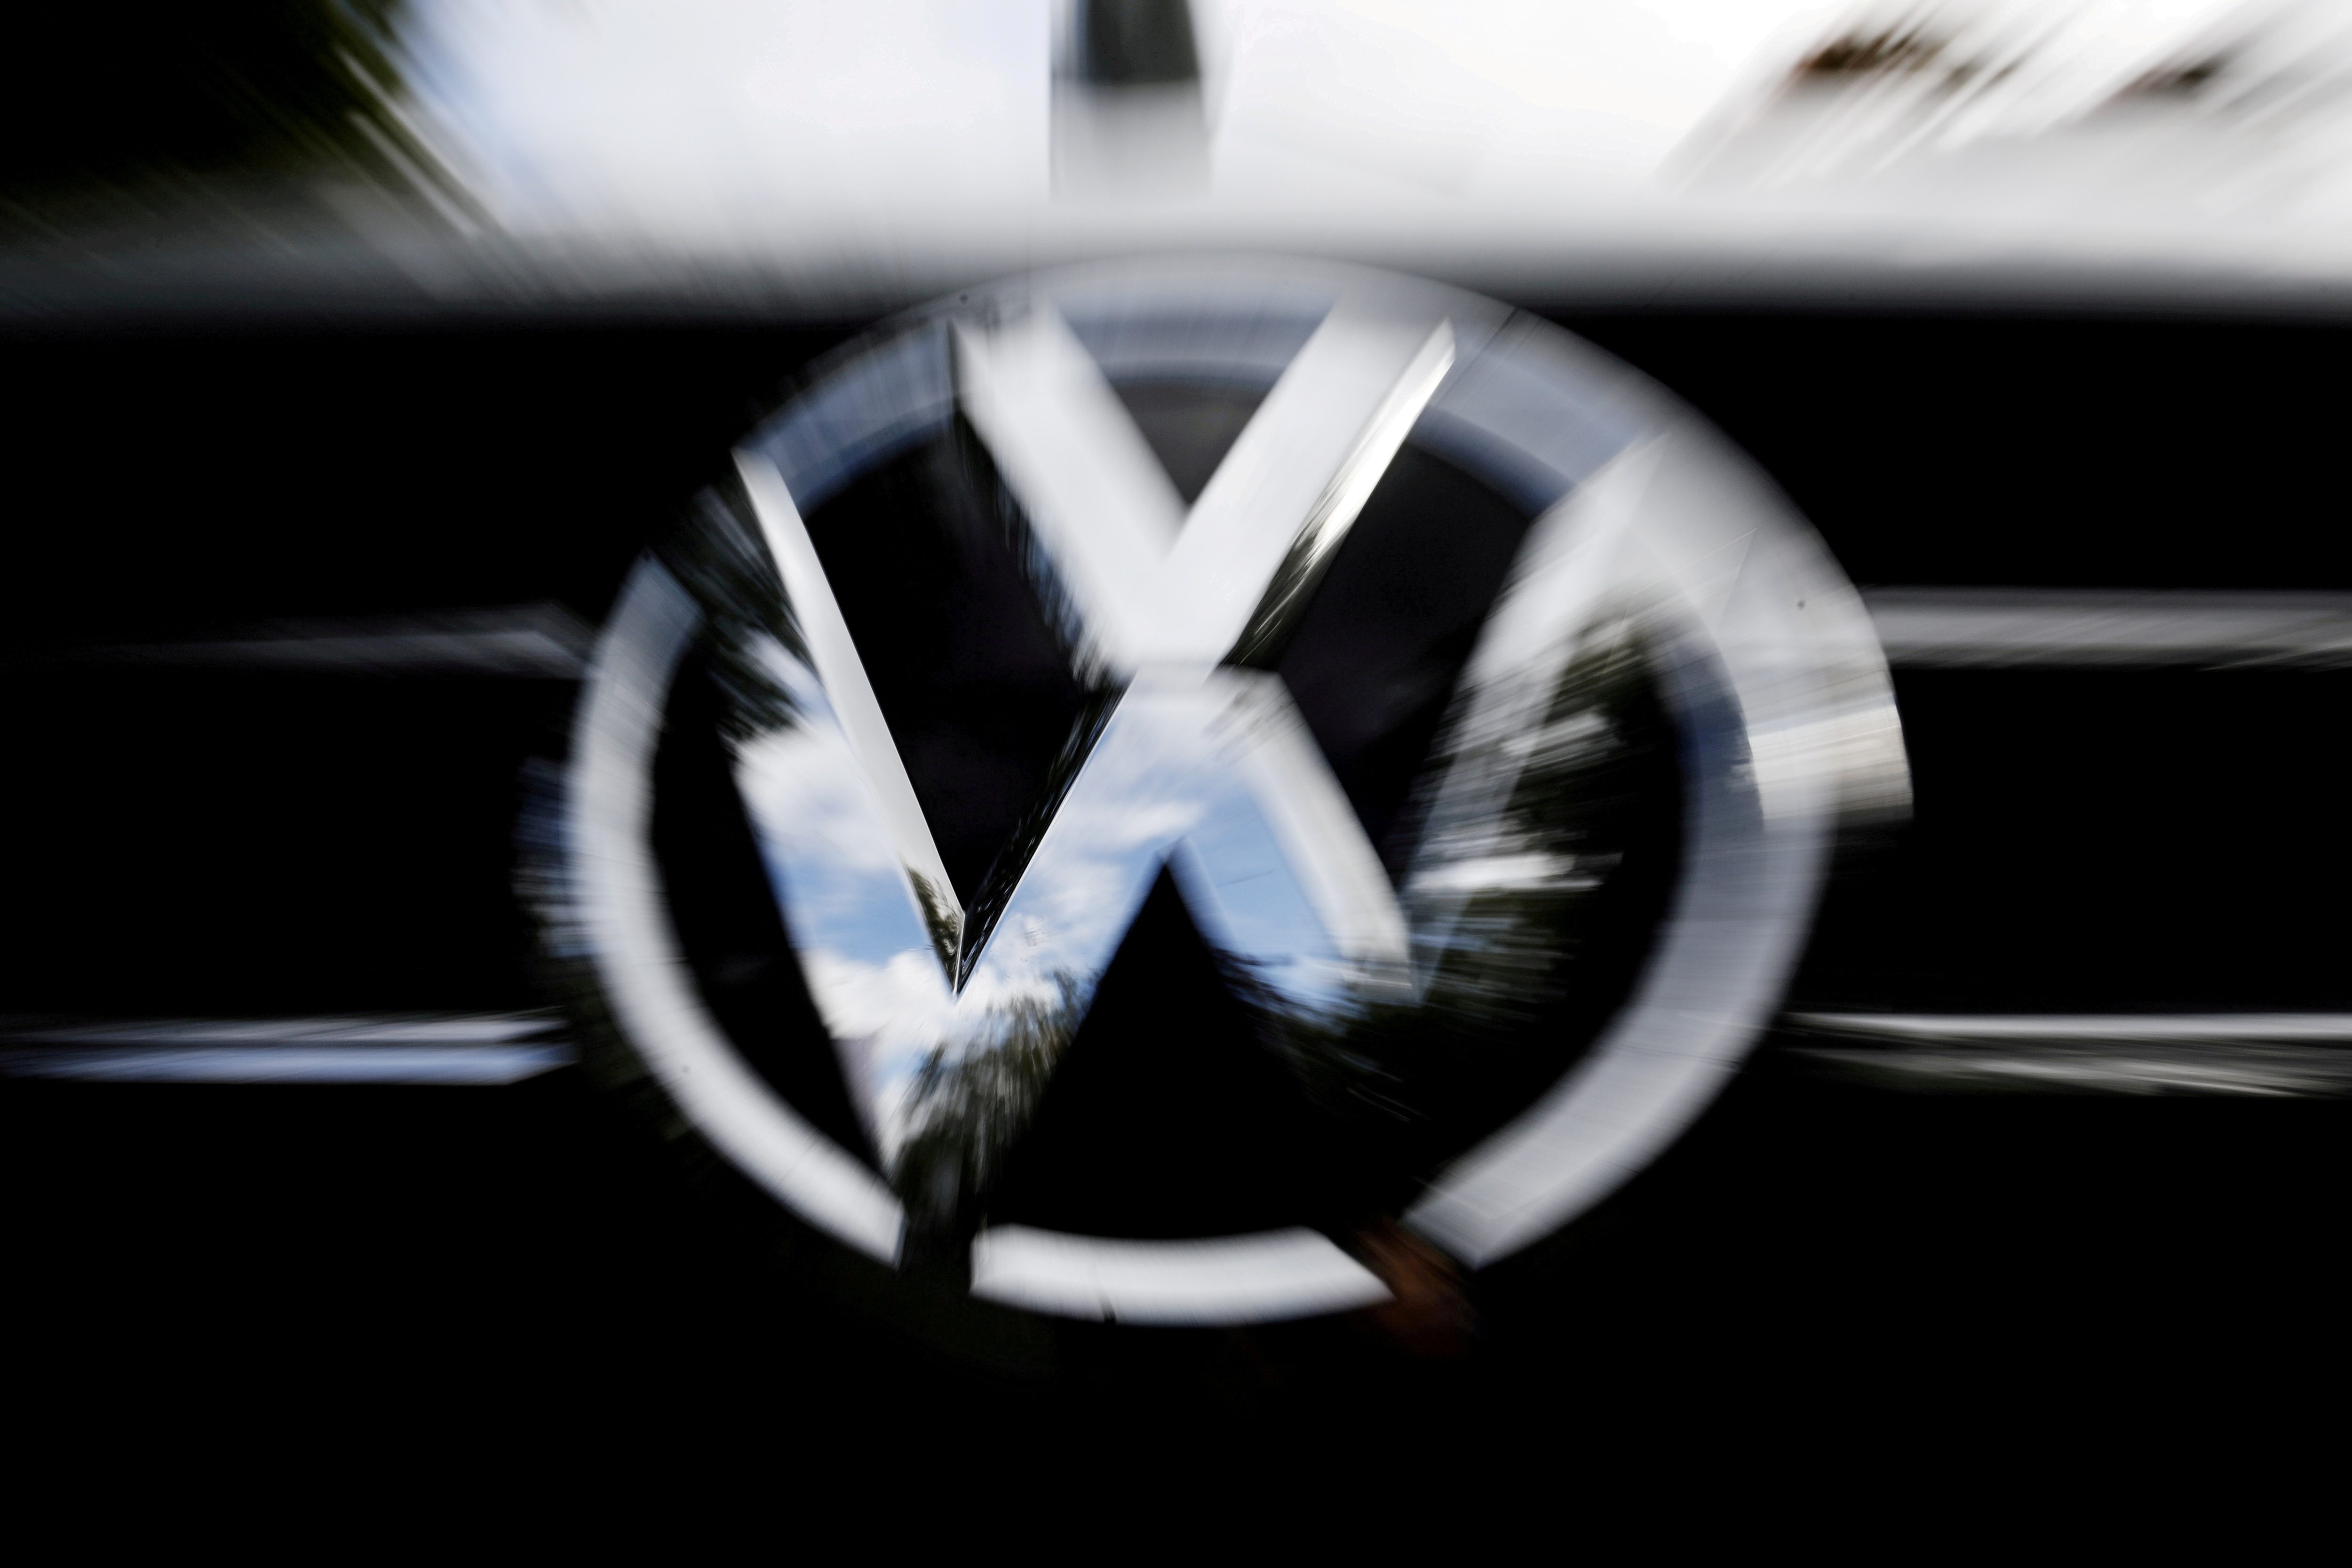 Court says VW should have published engine plan that sparked dieselgate